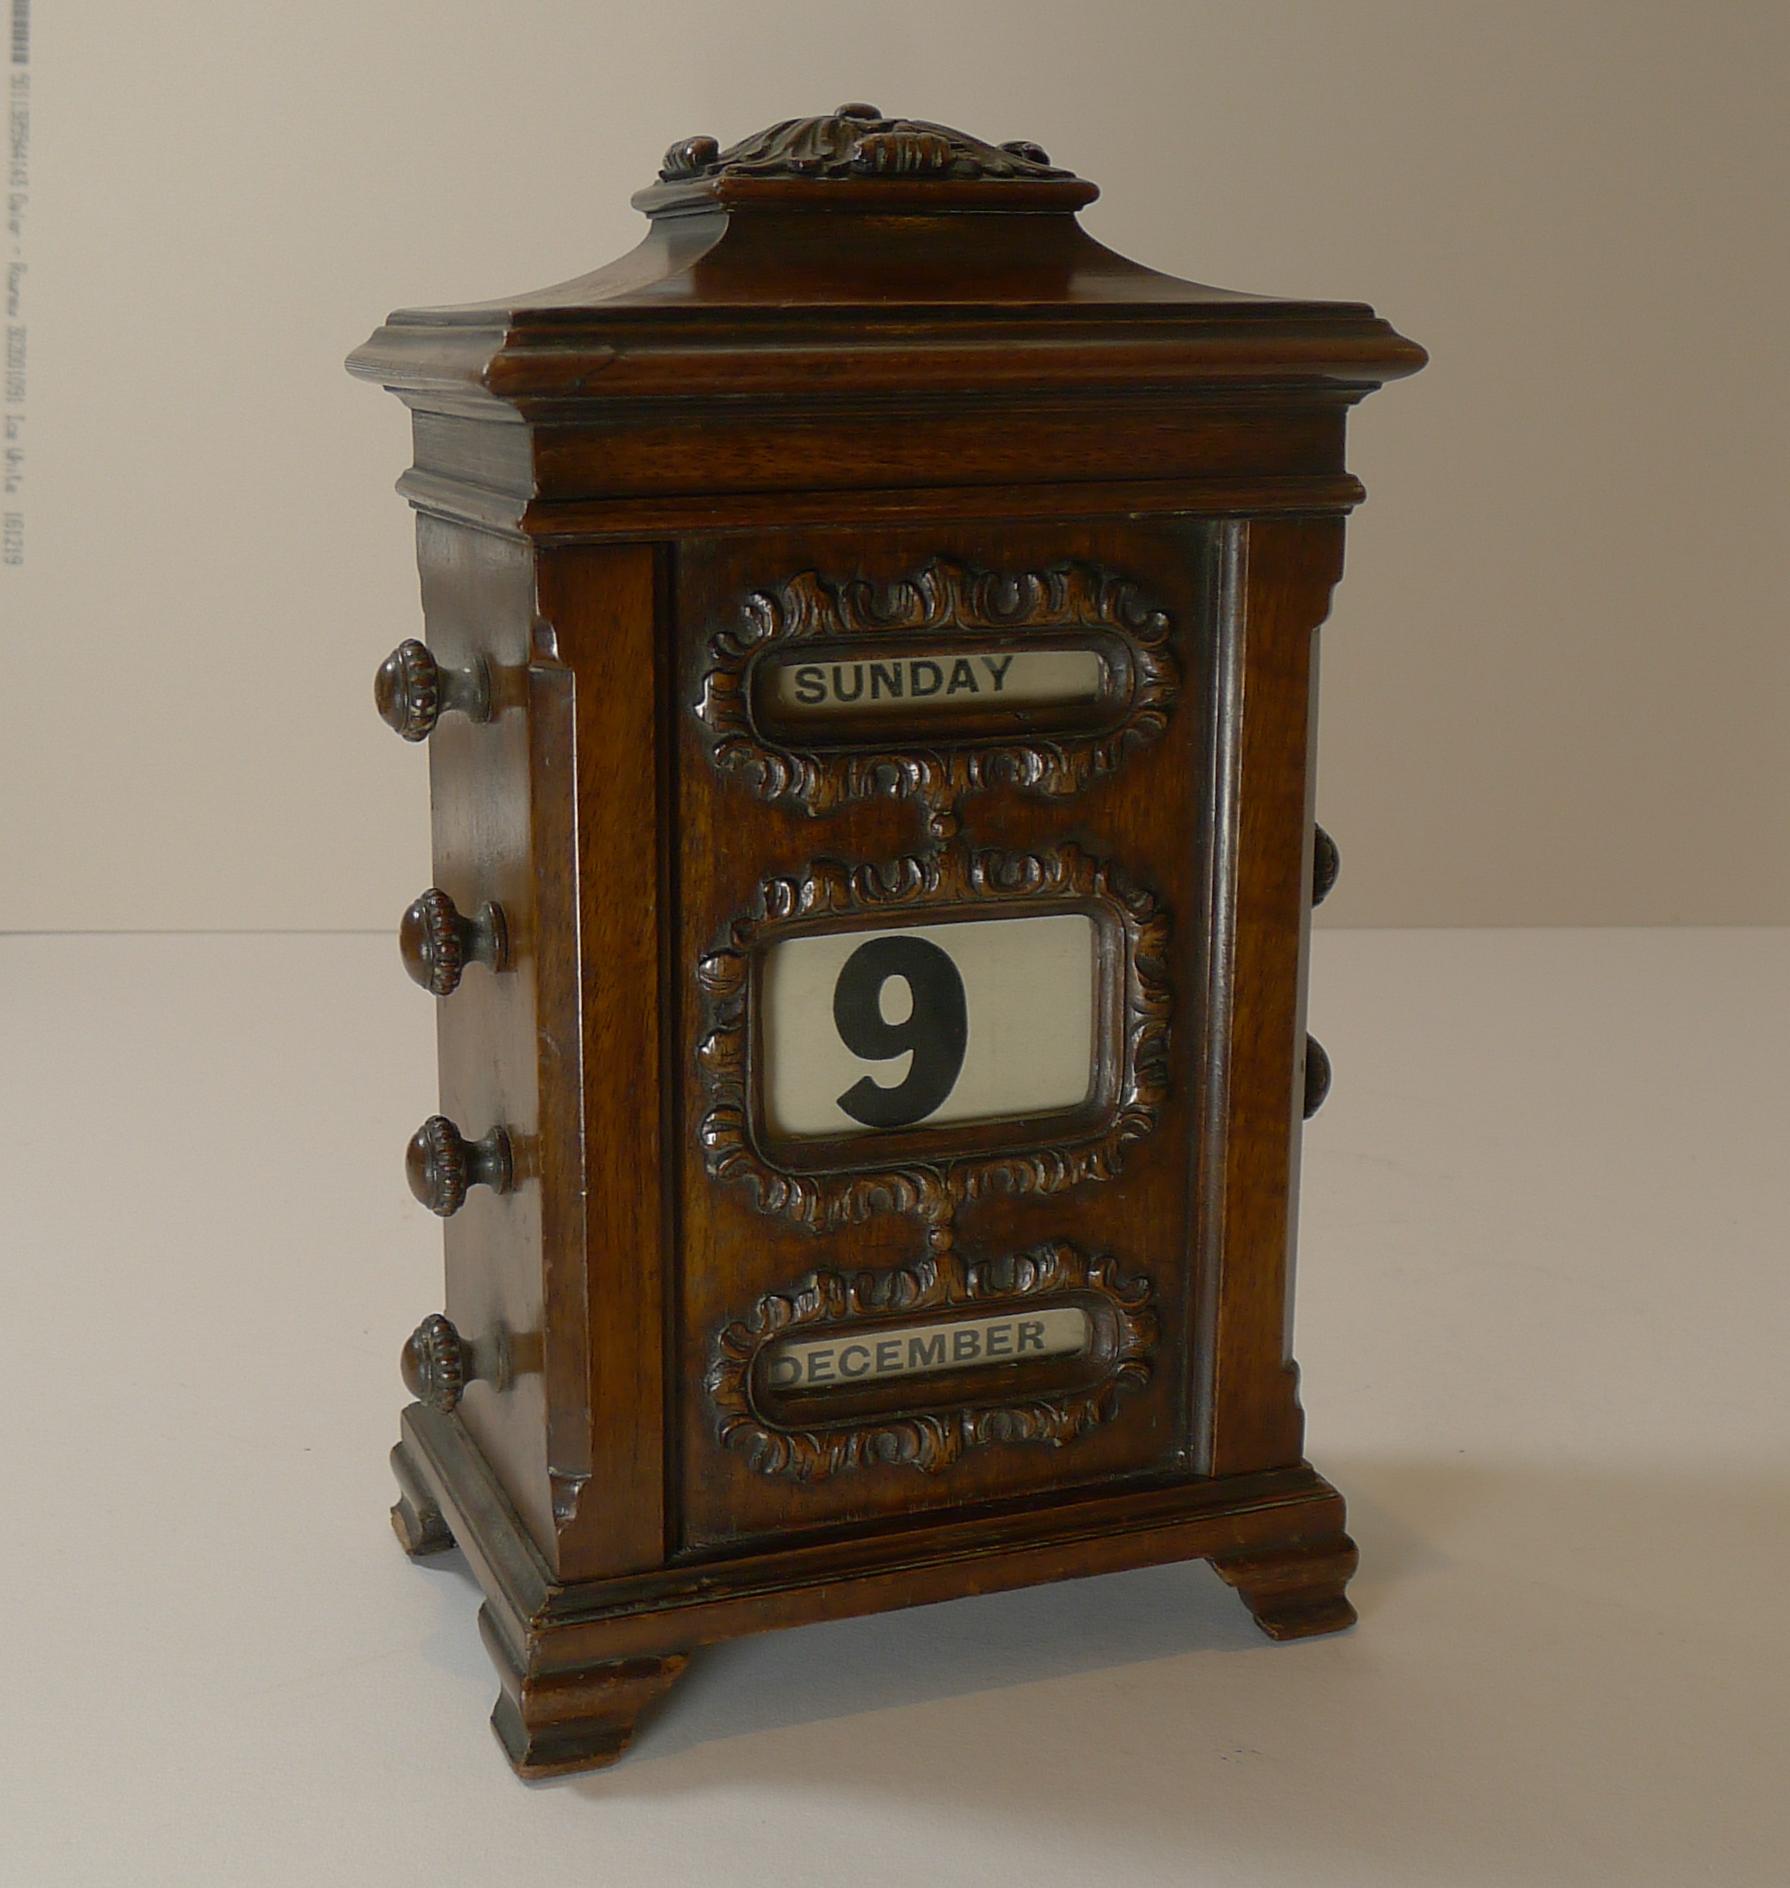 Late Victorian Rare Hand Carved Wooden Desk-Top Perpetual Calendar c.1900